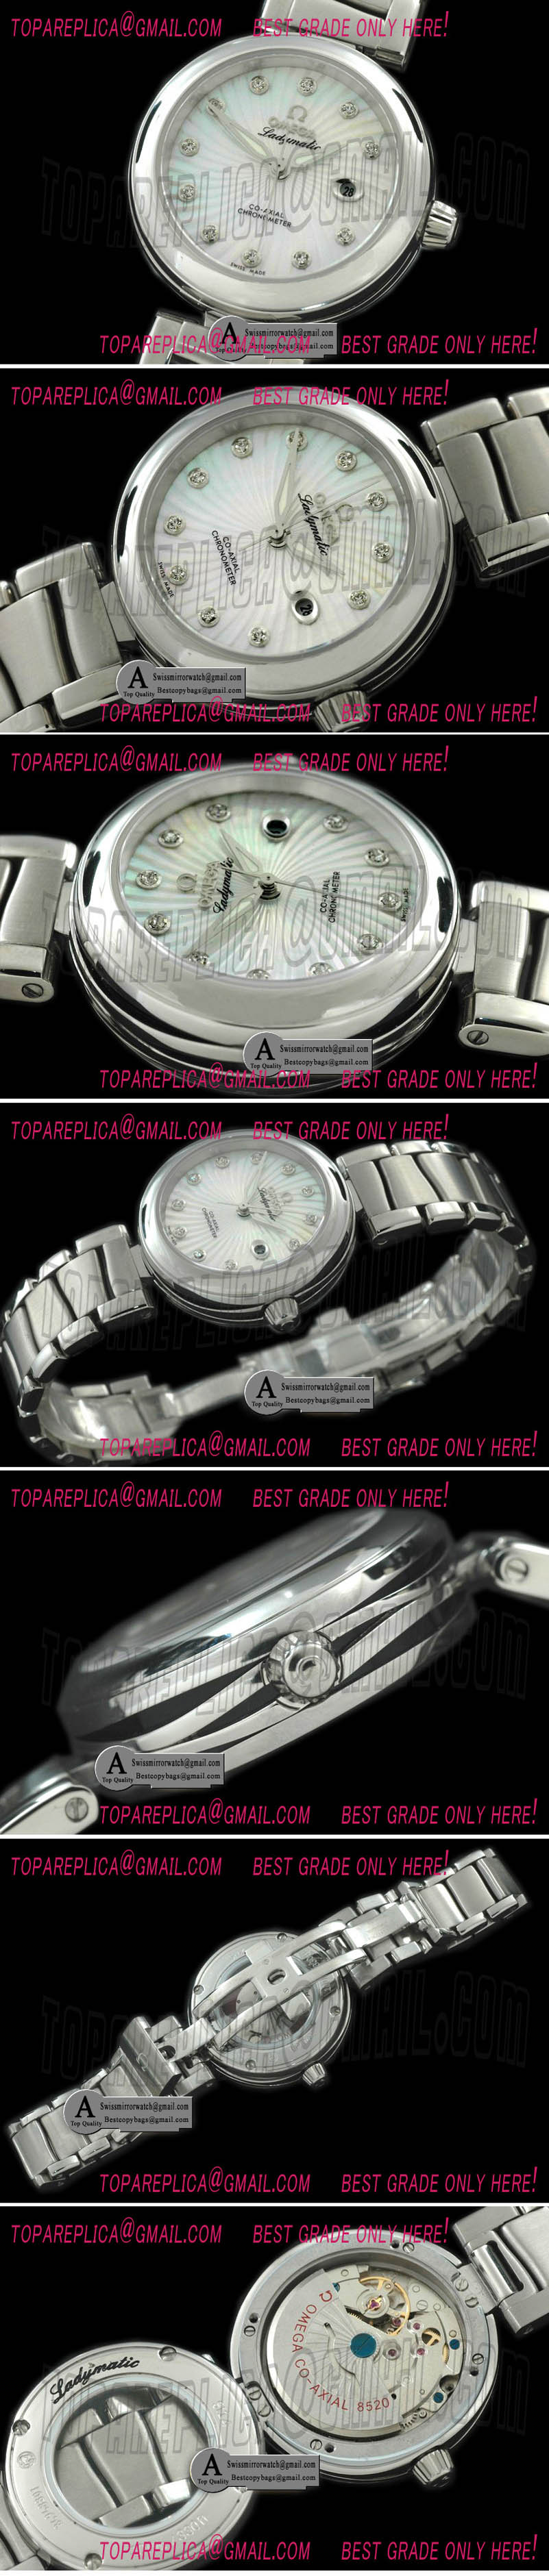 Omega 425.30.34.20.55.001 Deville Ladymatic Mid SS/SS White 2813 21J Replica Watches